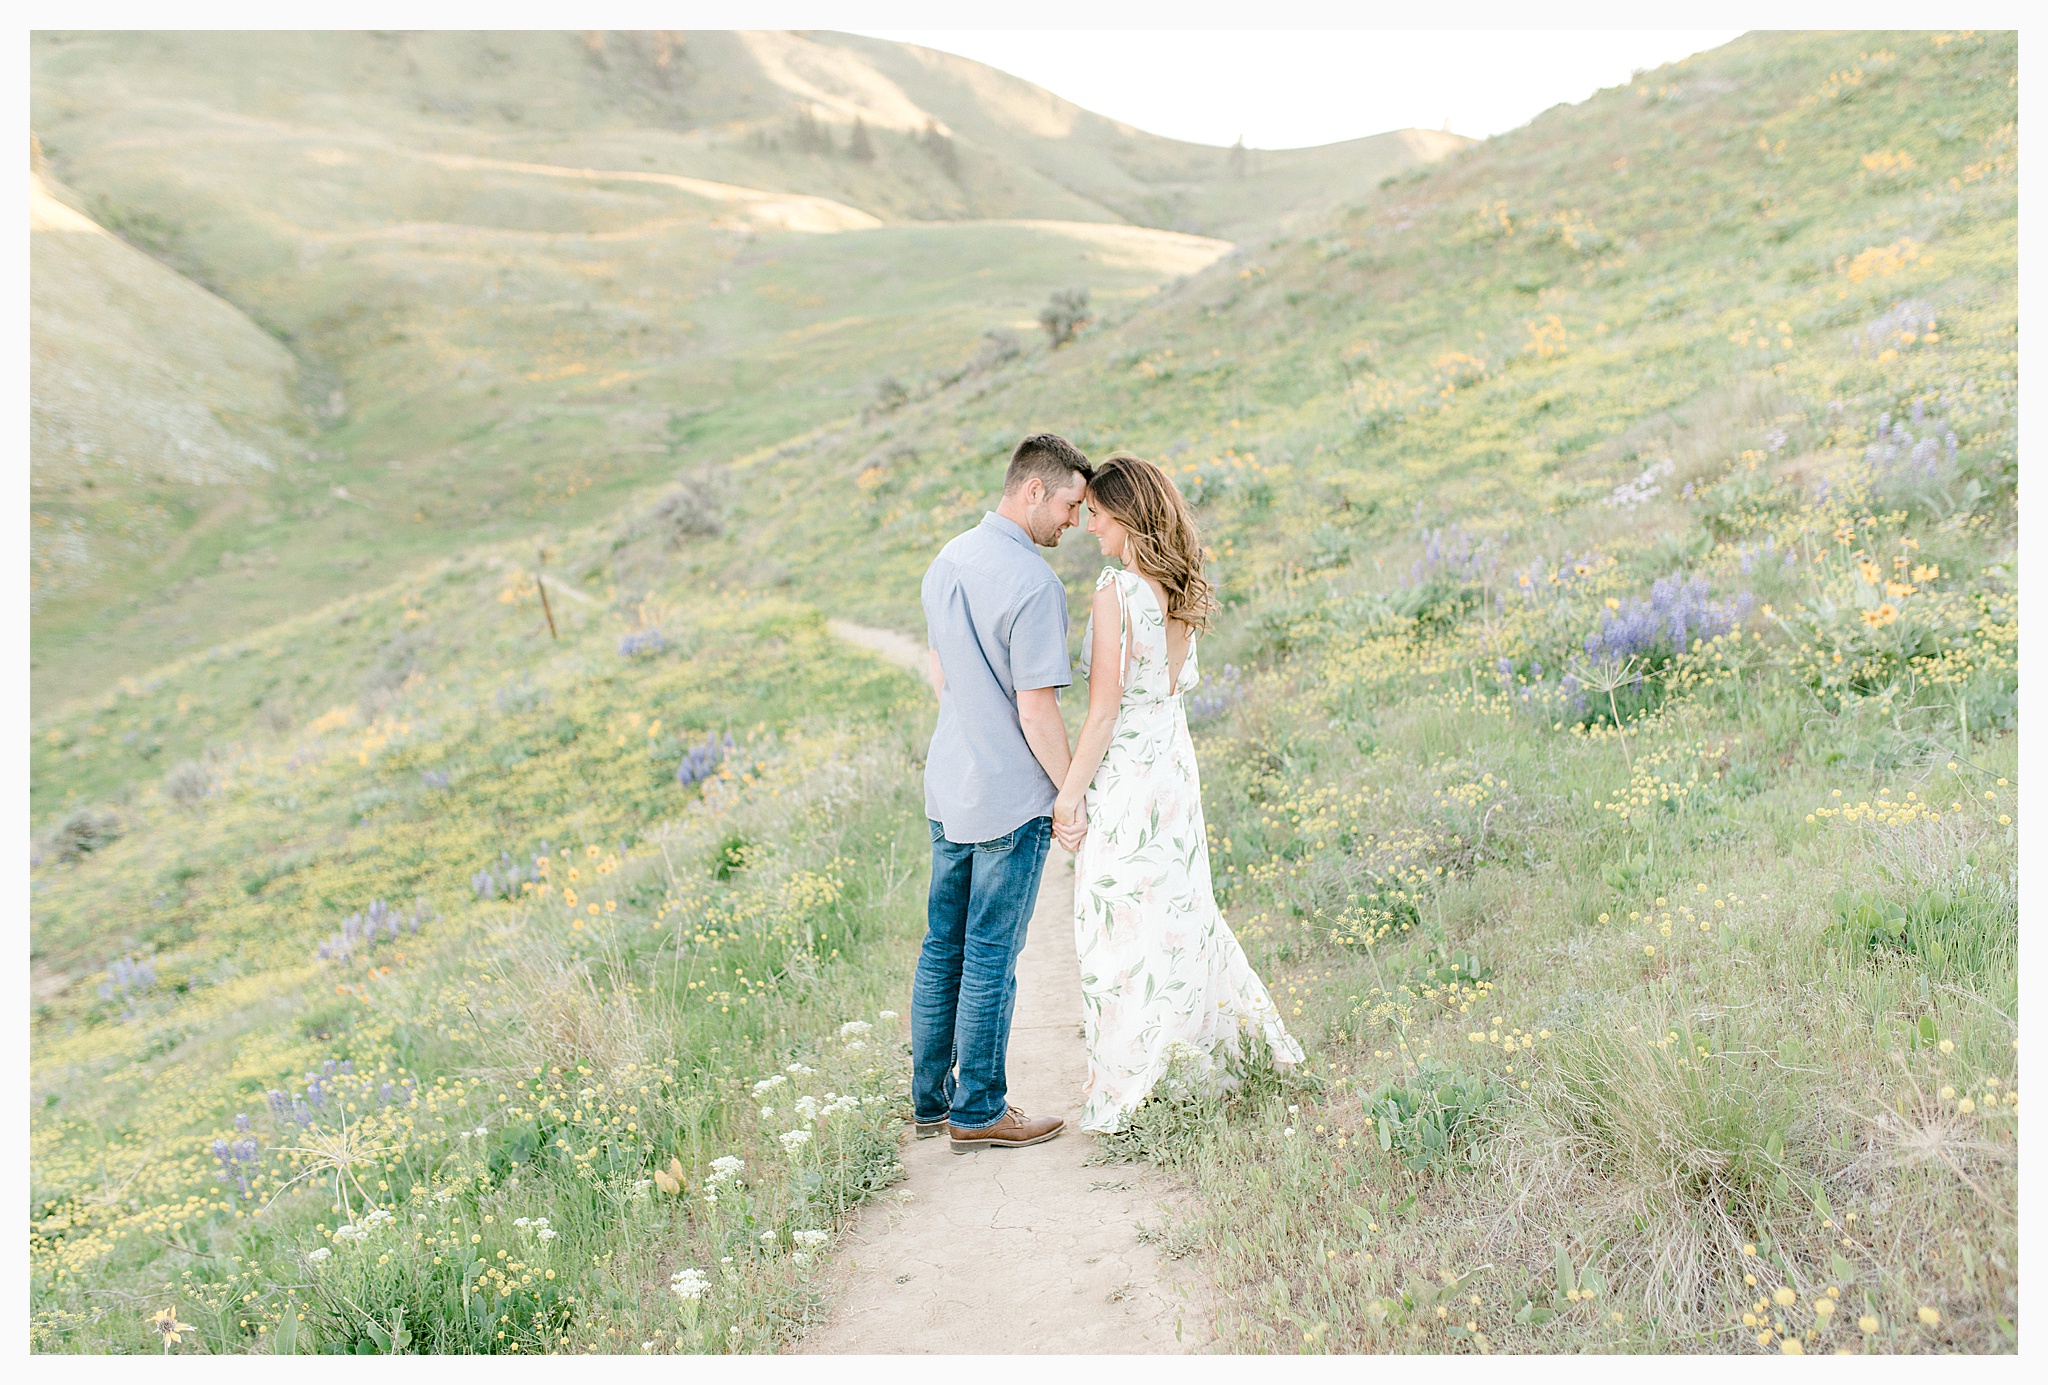 Engagement session amongst the wildflowers in Wenatchee, Washington | Engagement Session Outfit Inspiration for Wedding Photography with Emma Rose Company | Light and Airy PNW Photographer, Seattle Bride_0019.jpg